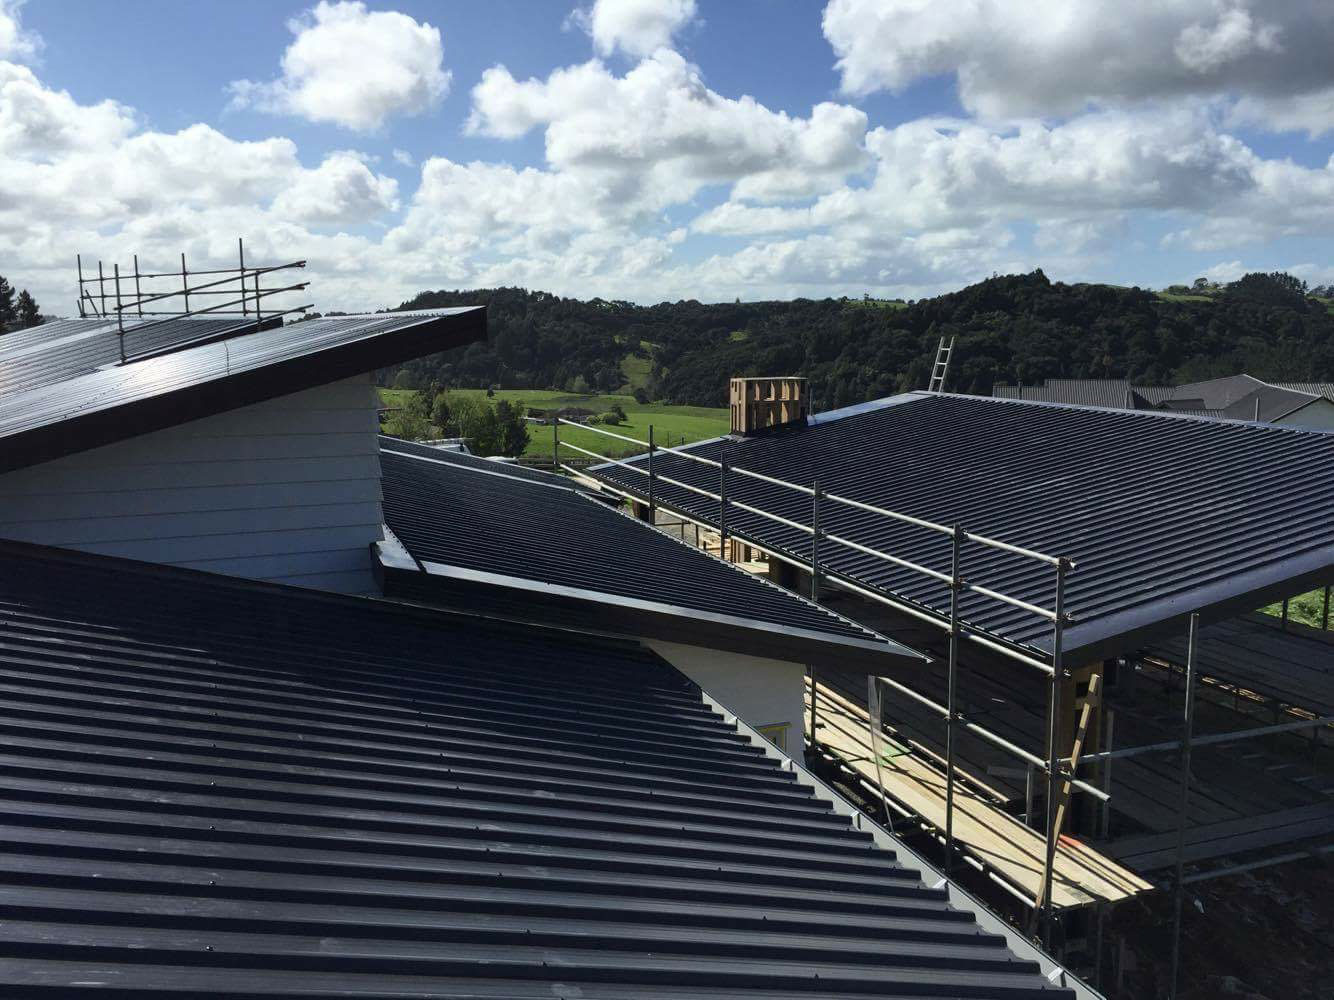 auckland roofing solutions services auckland and new zealand wide new roofs repair cladding and more Project gallery 69